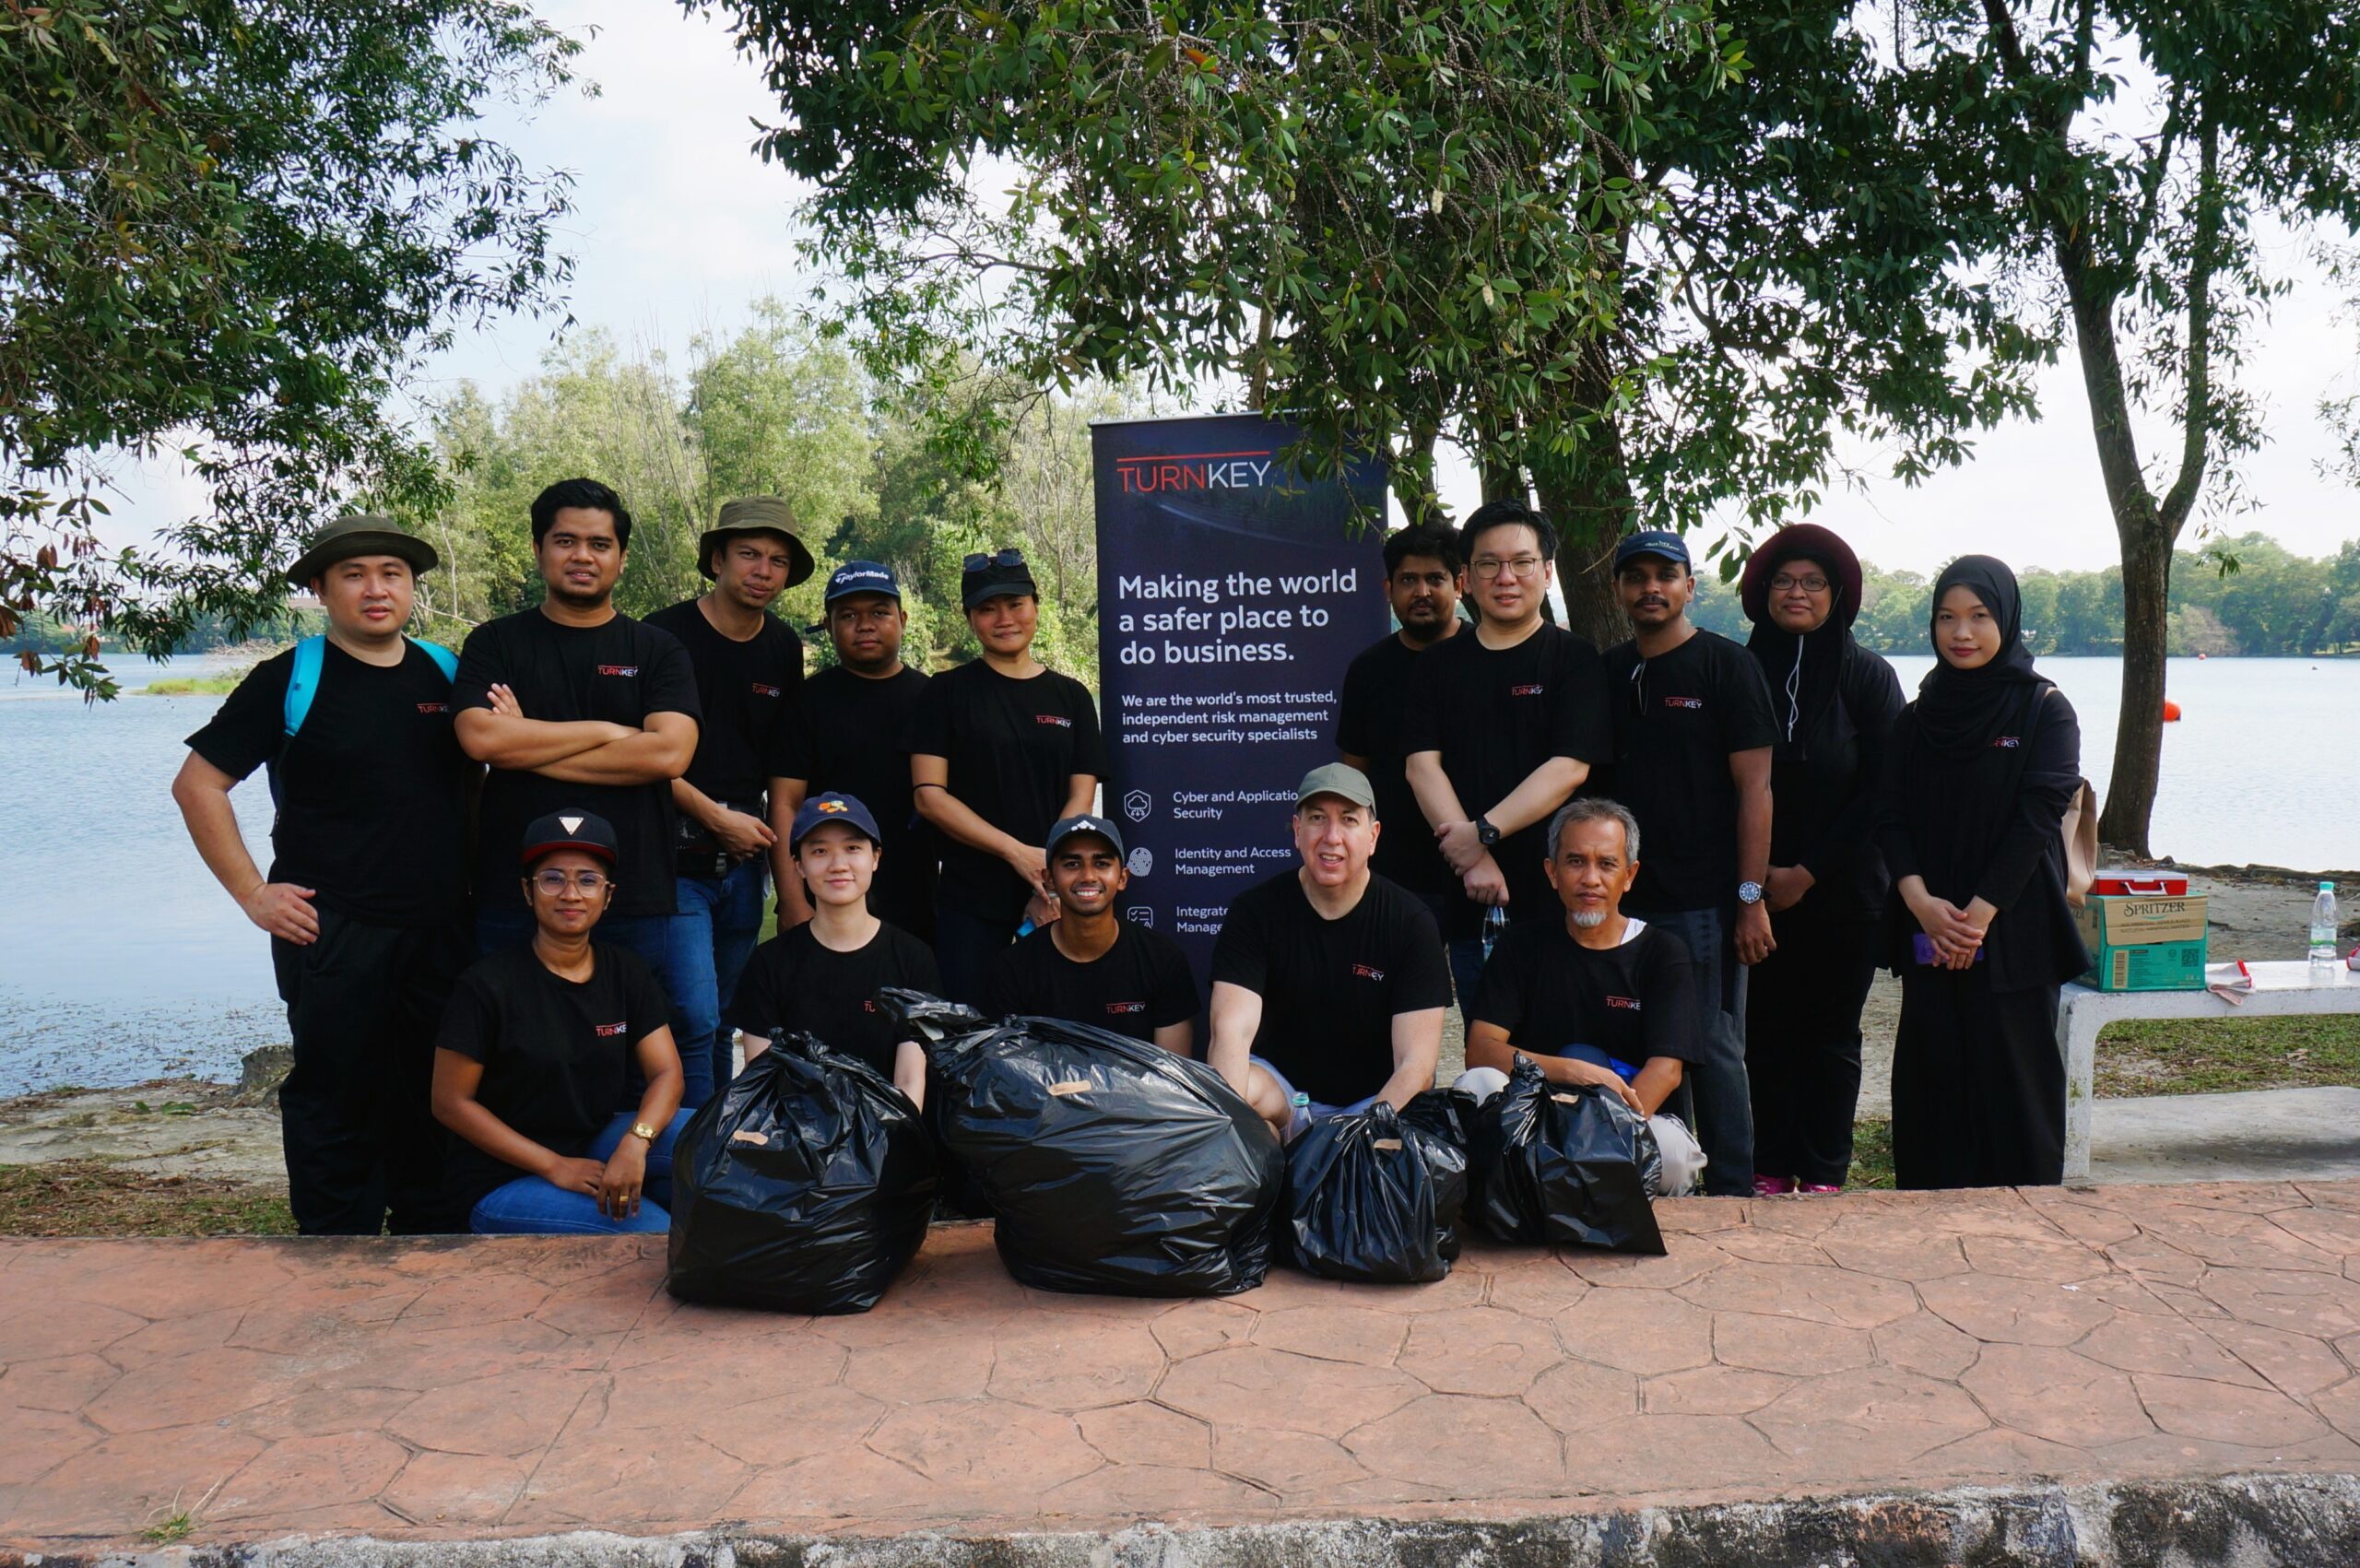 Turnkey consulting's csr initiative uncovers 60kg trash, sparks urgency for cleaner environment | weirdkaya